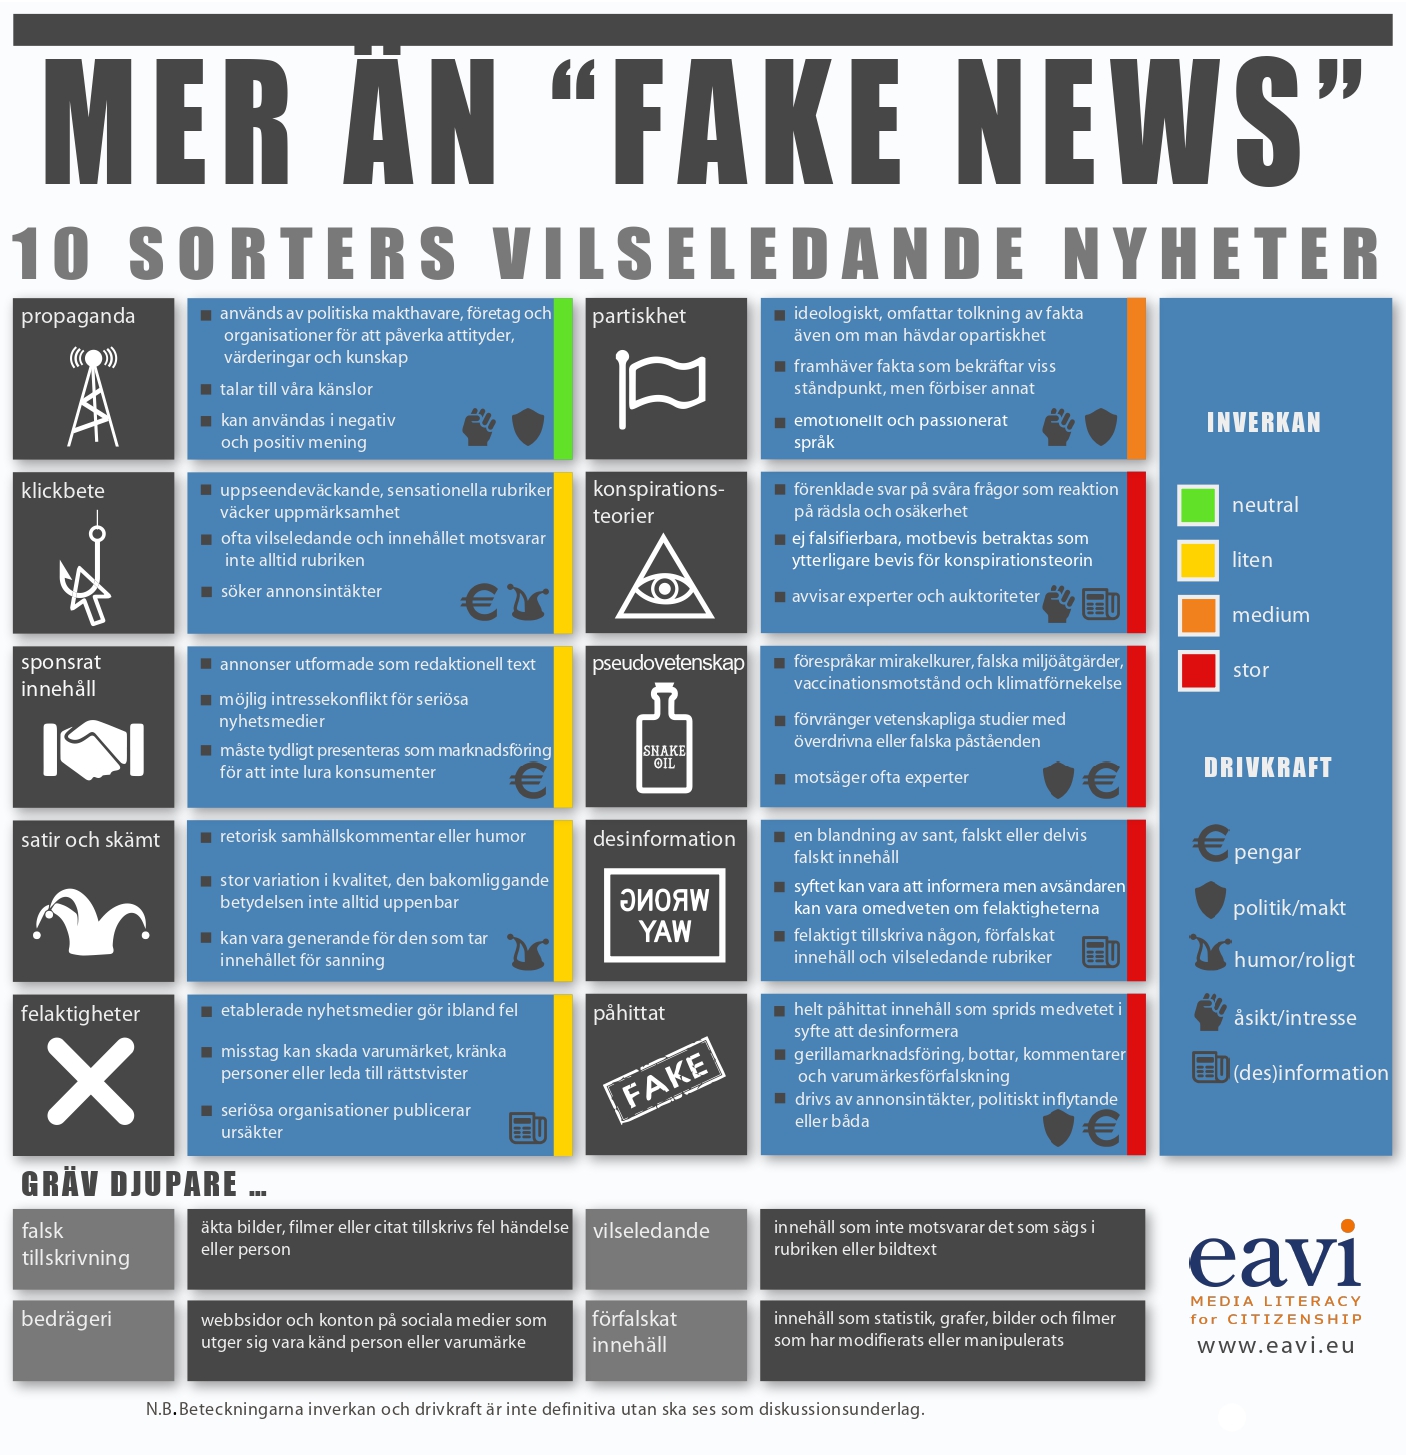 How To Spot Fake News, Visualized in One Infographic